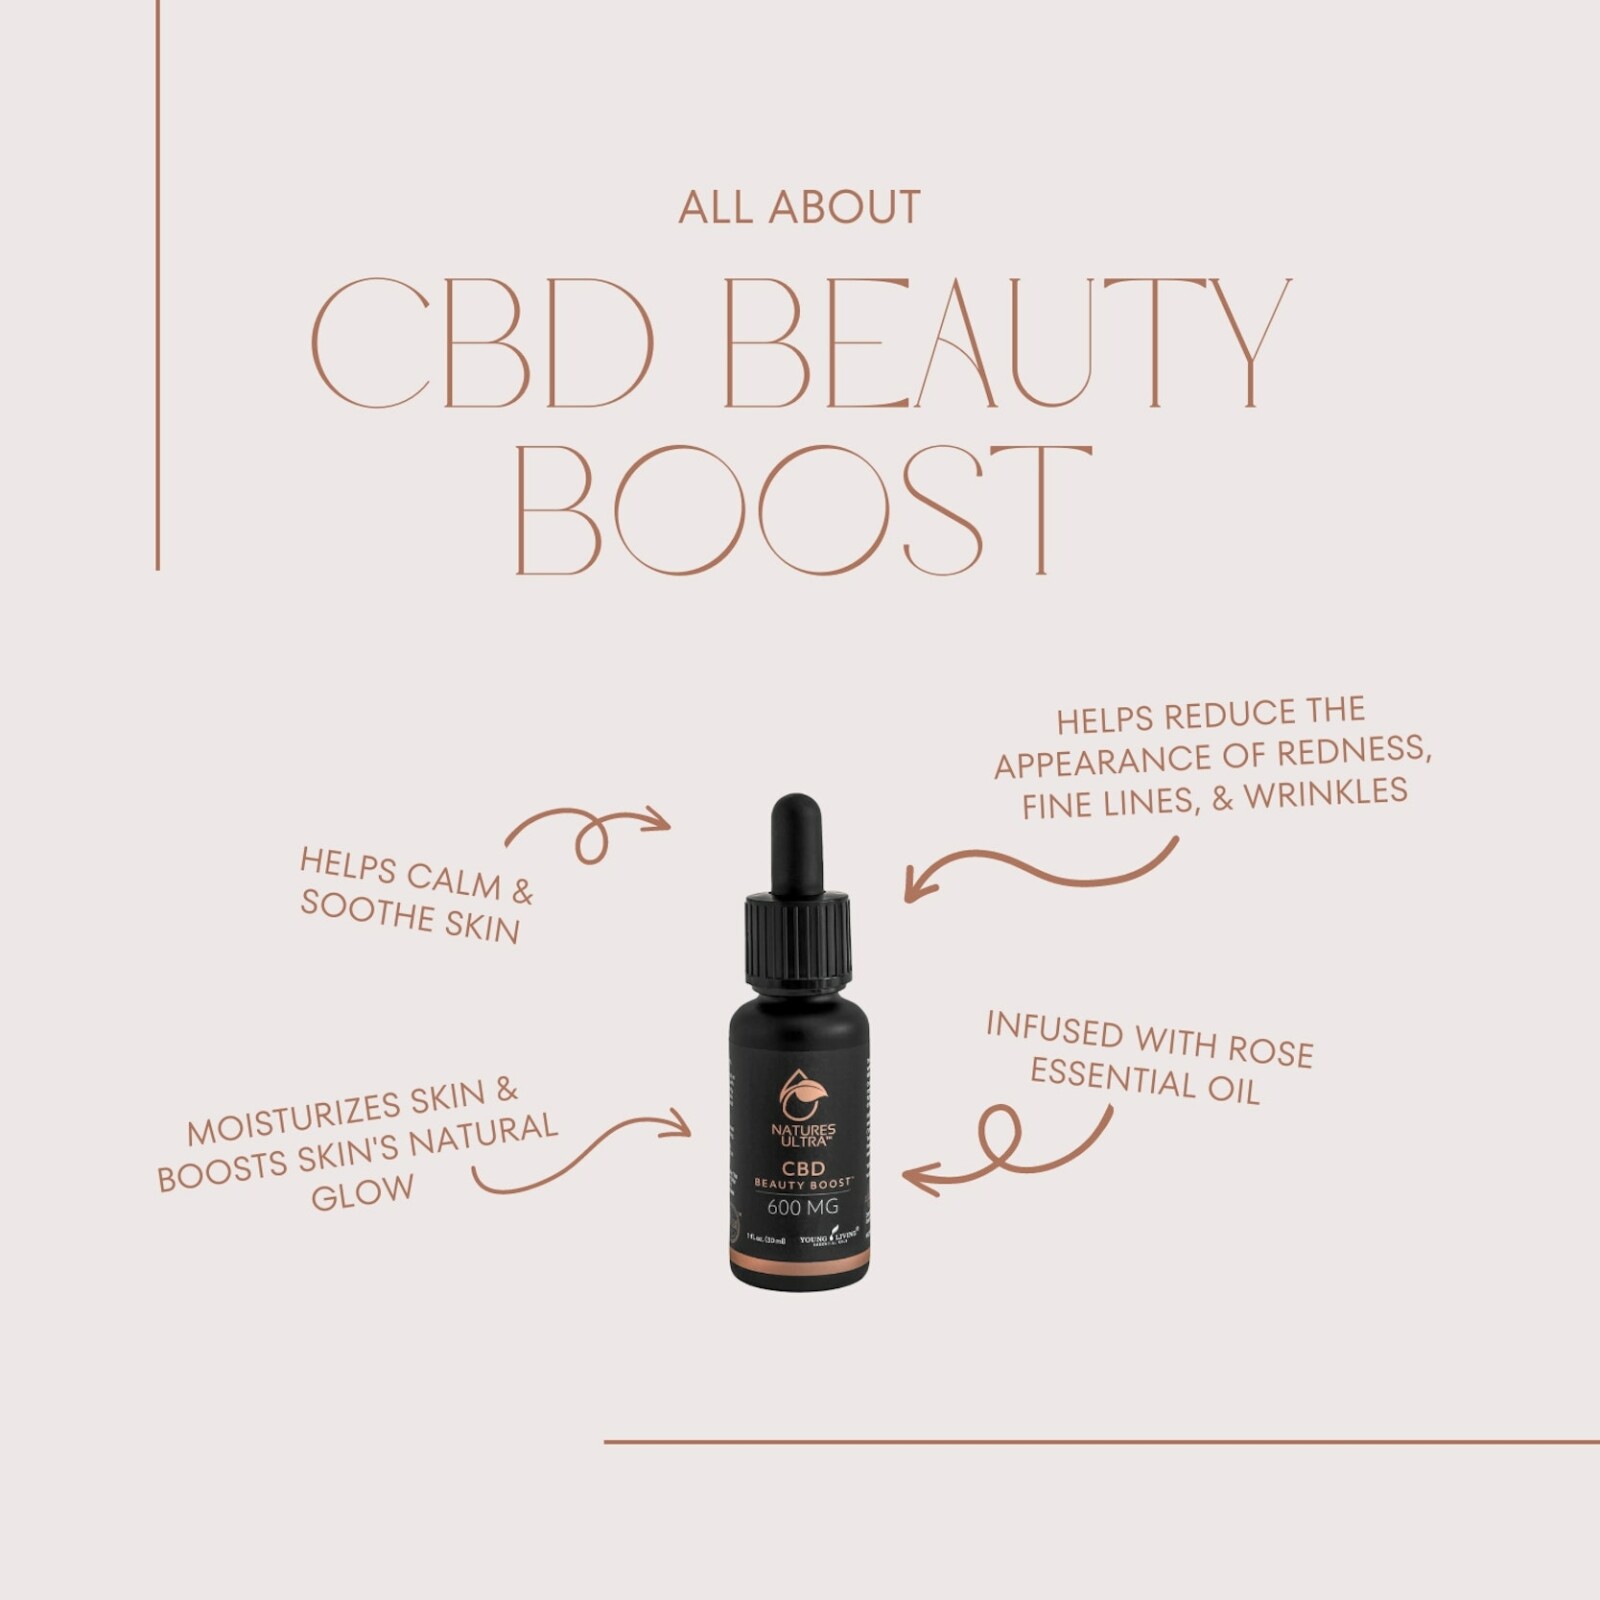 All About CBD Beauty Boost